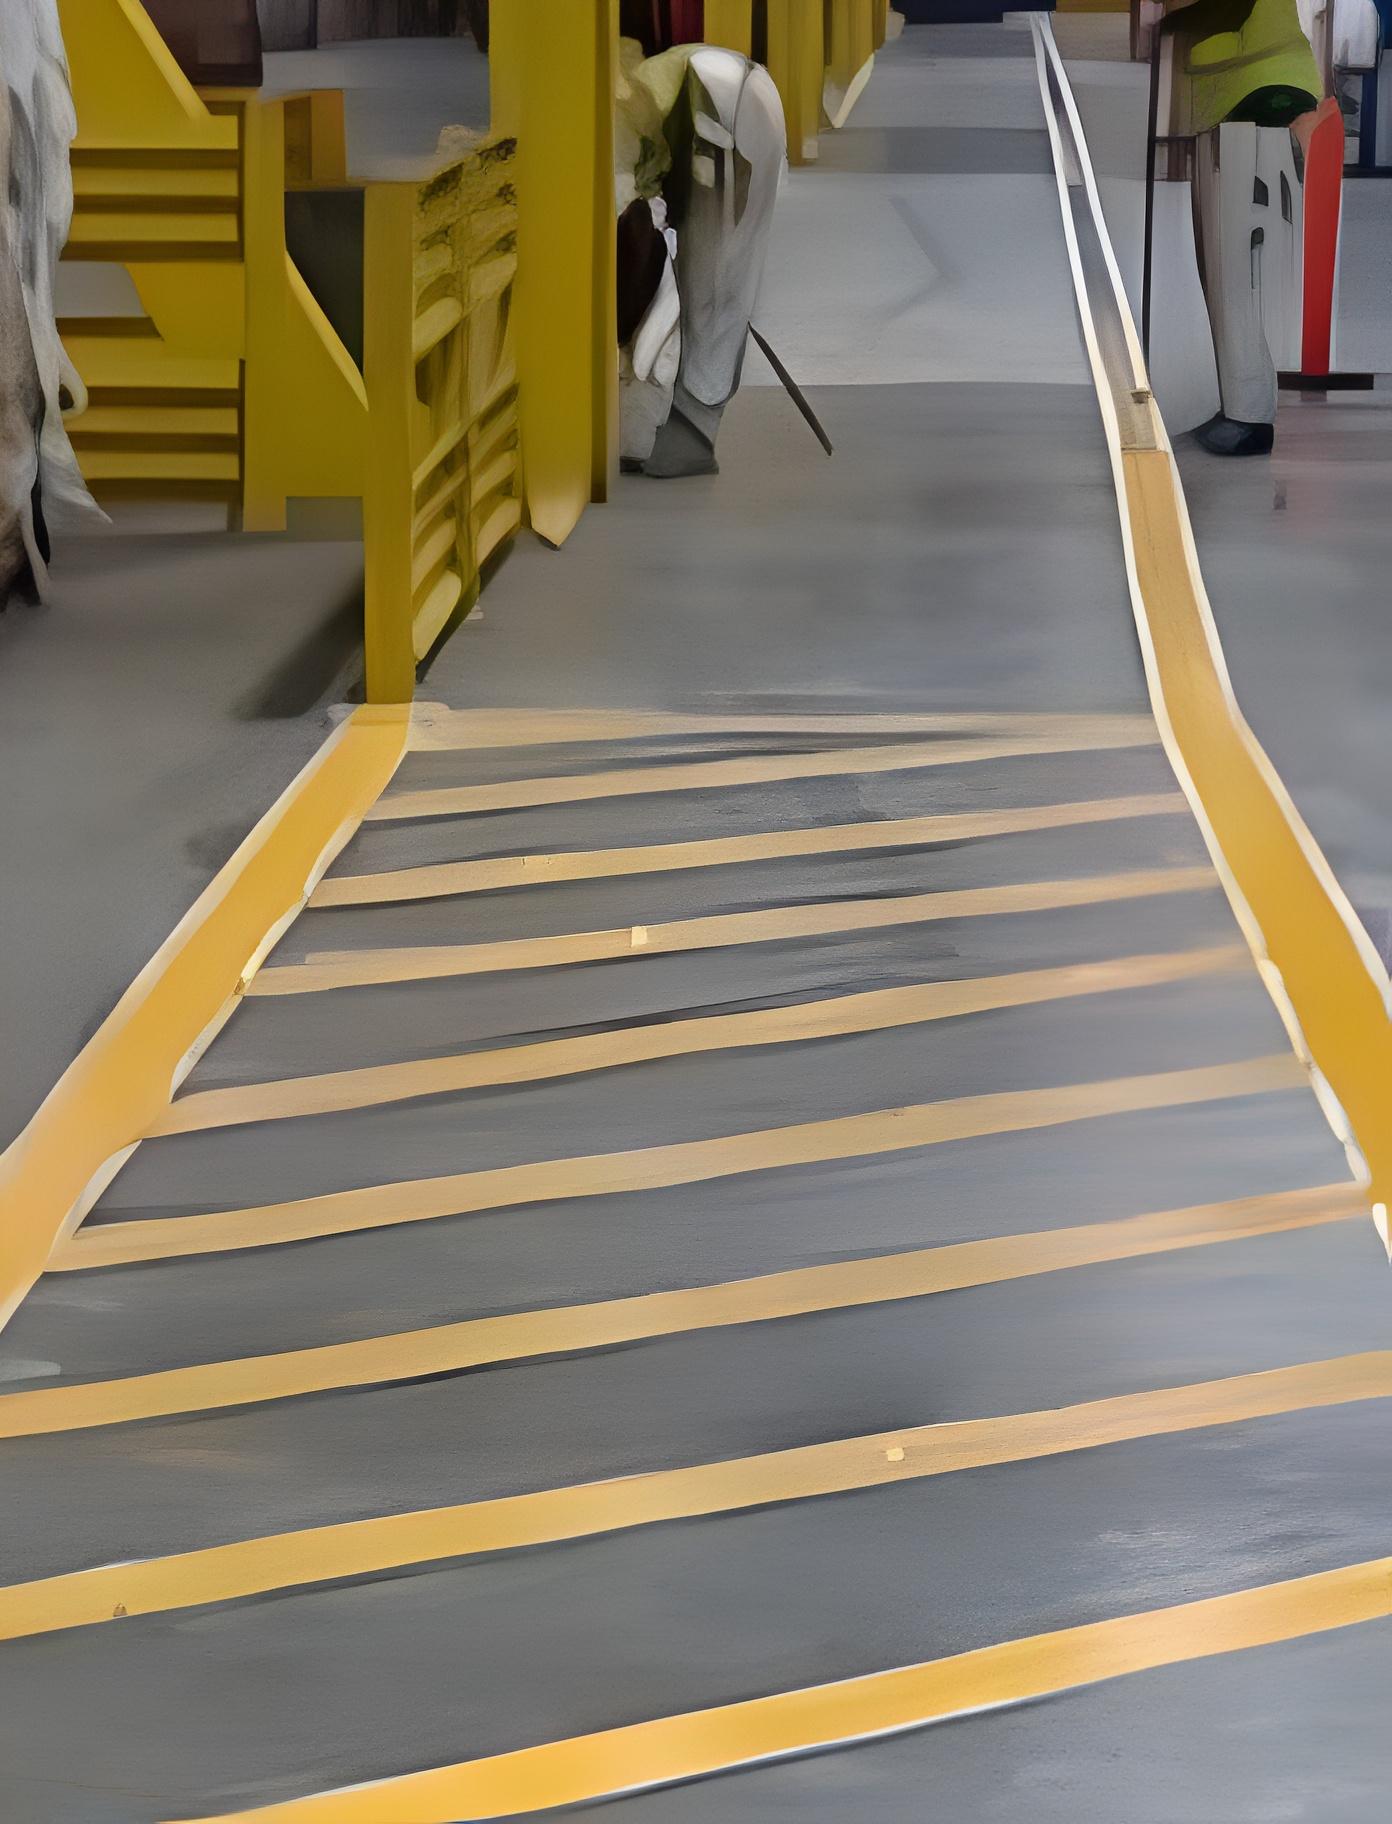 Durable Line Stripping Project in a Warehouse Located in San Pedro CA.